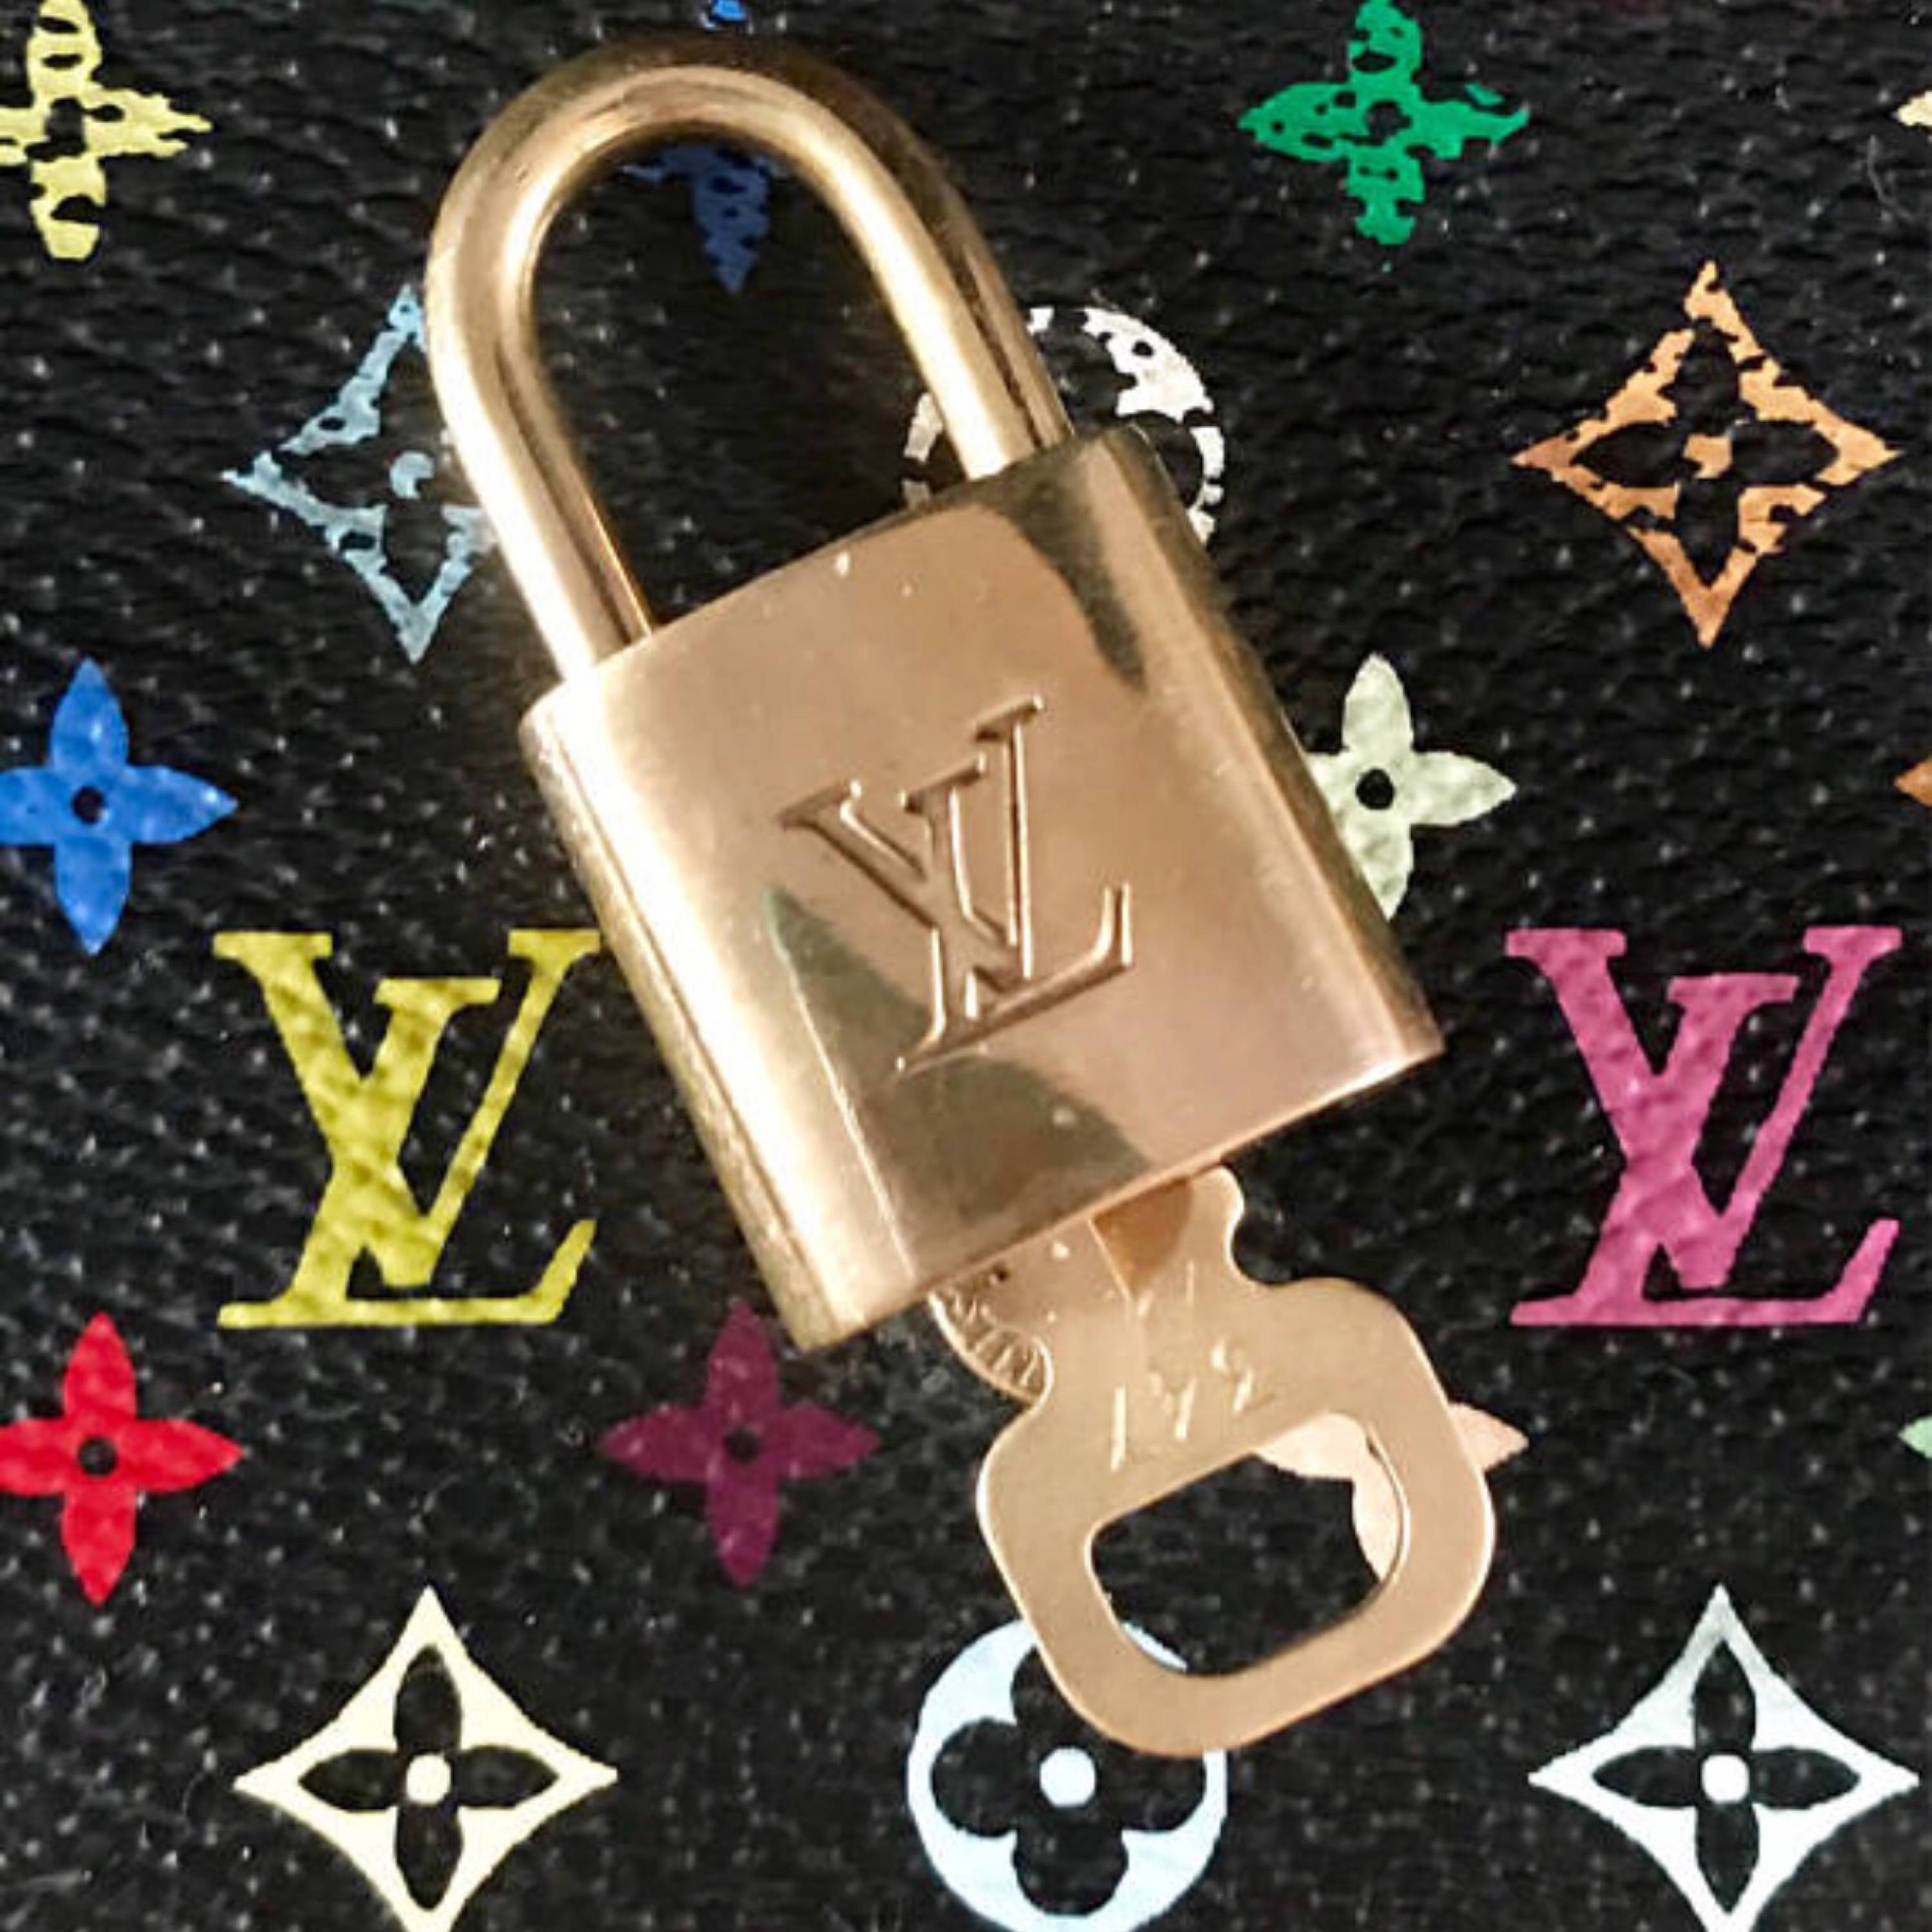 LOUIS VUITTON AUTH BRASS CHARM LOCK KEY PADLOCK- POLISHED! Fits all bags!  USA